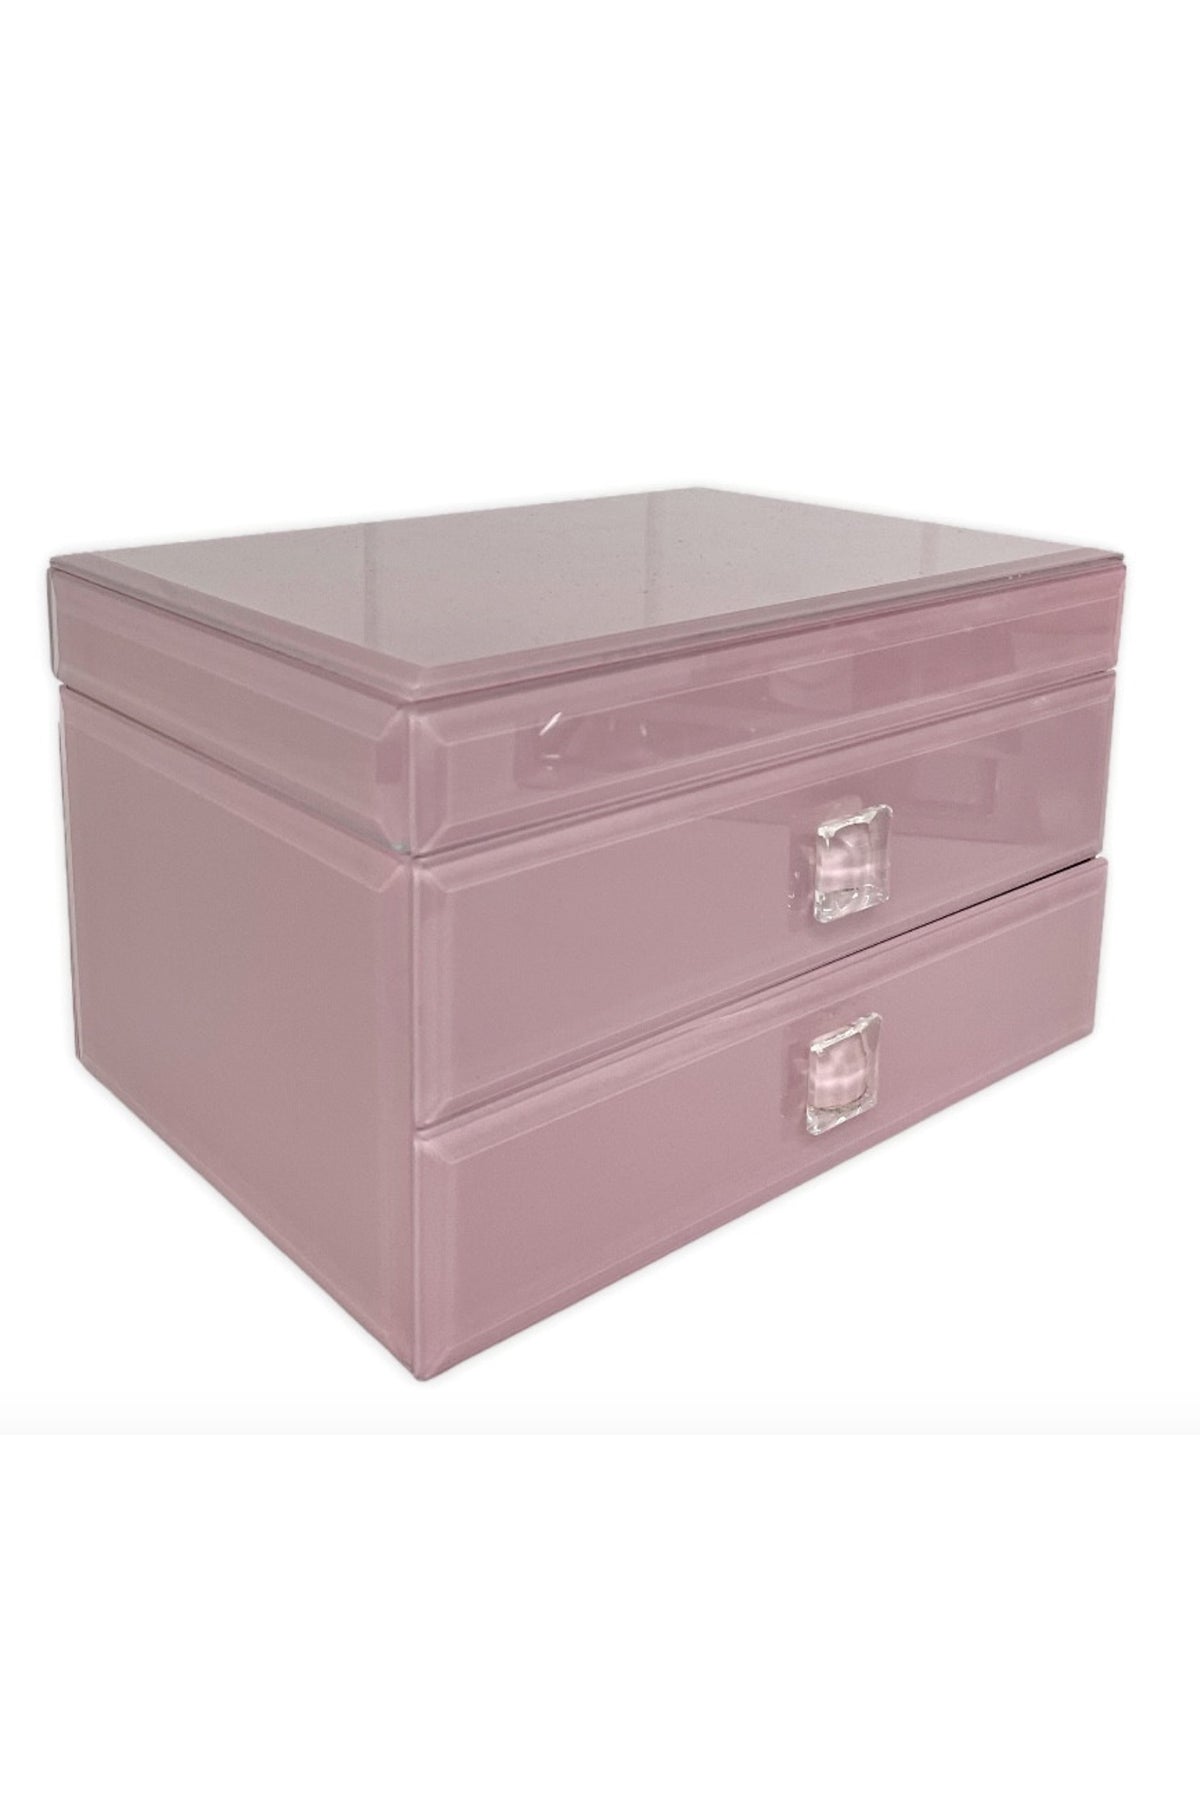 jewellery box with drawers pink